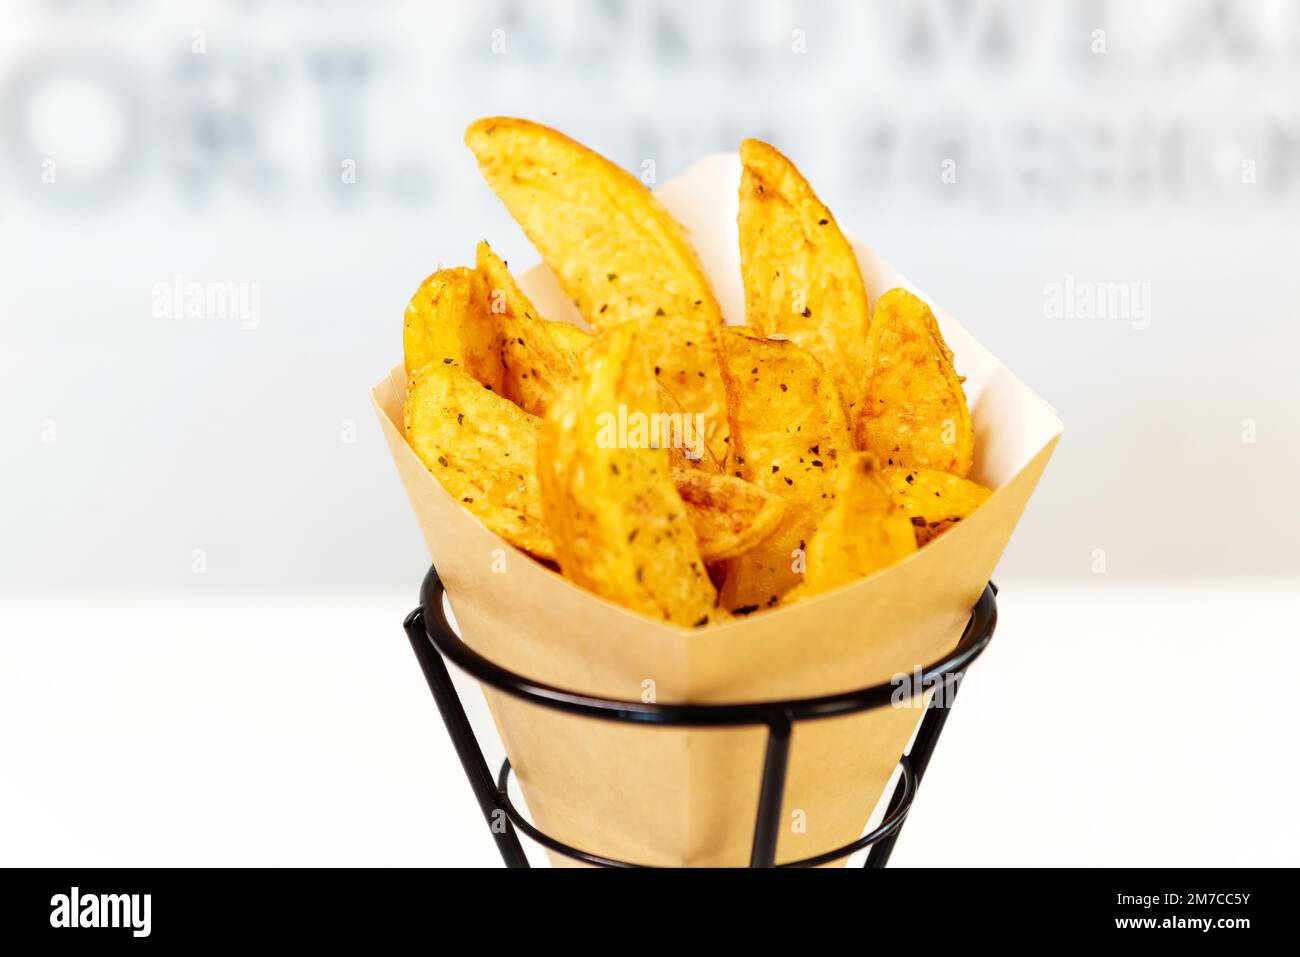 Oven baked potato wedges with sea salt and herbs. fries in a recyclable paper bag, popular fast street food Stock Photo